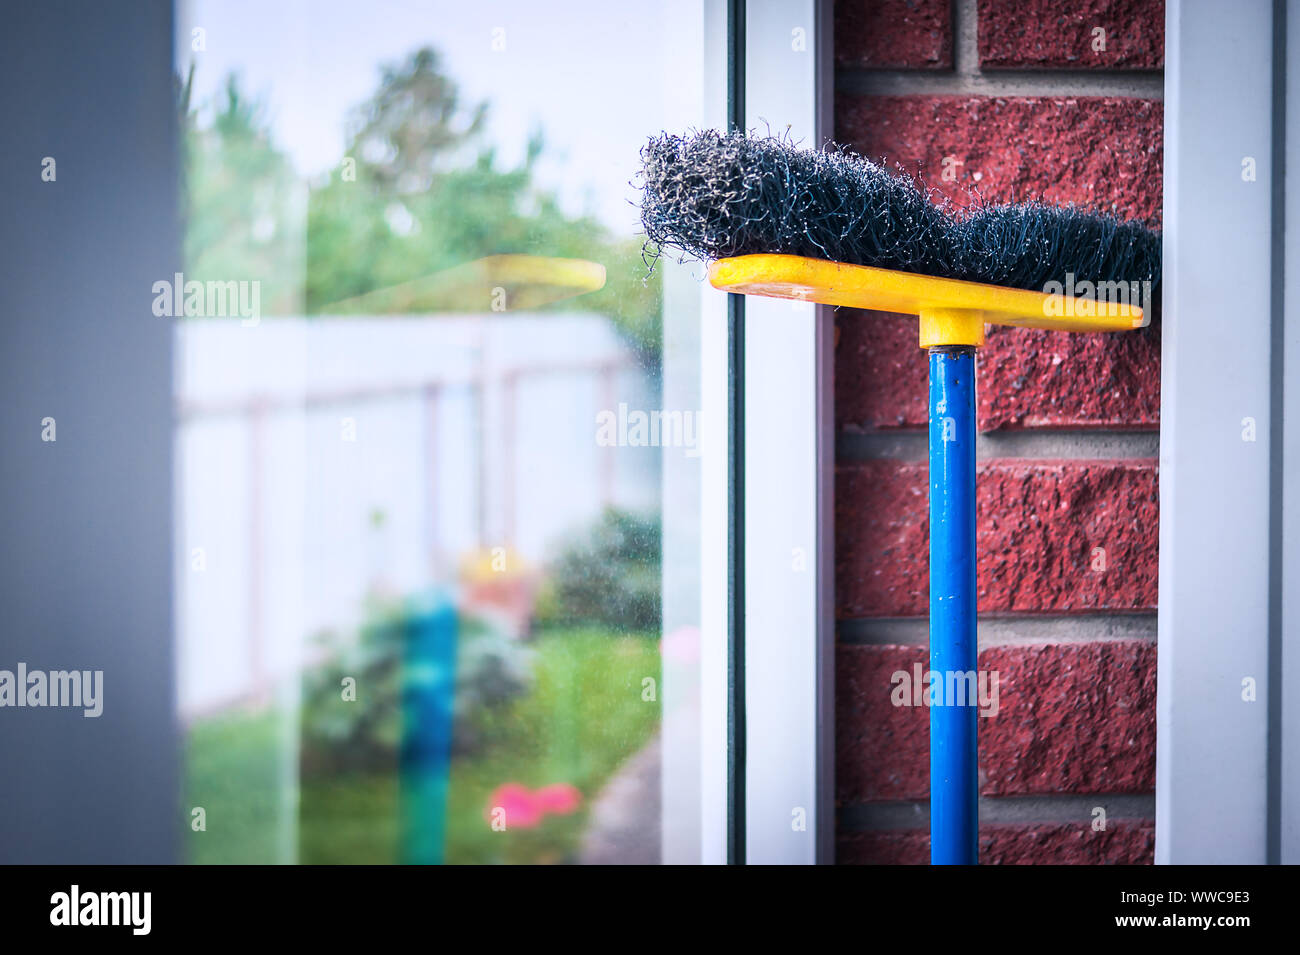 Yellow, Blue and Black Poly Push Broom Leaned Against the Glass and Red Brick Wall in the Mud Room. Keep Your Environment Clean and Tidy Concept. Stock Photo